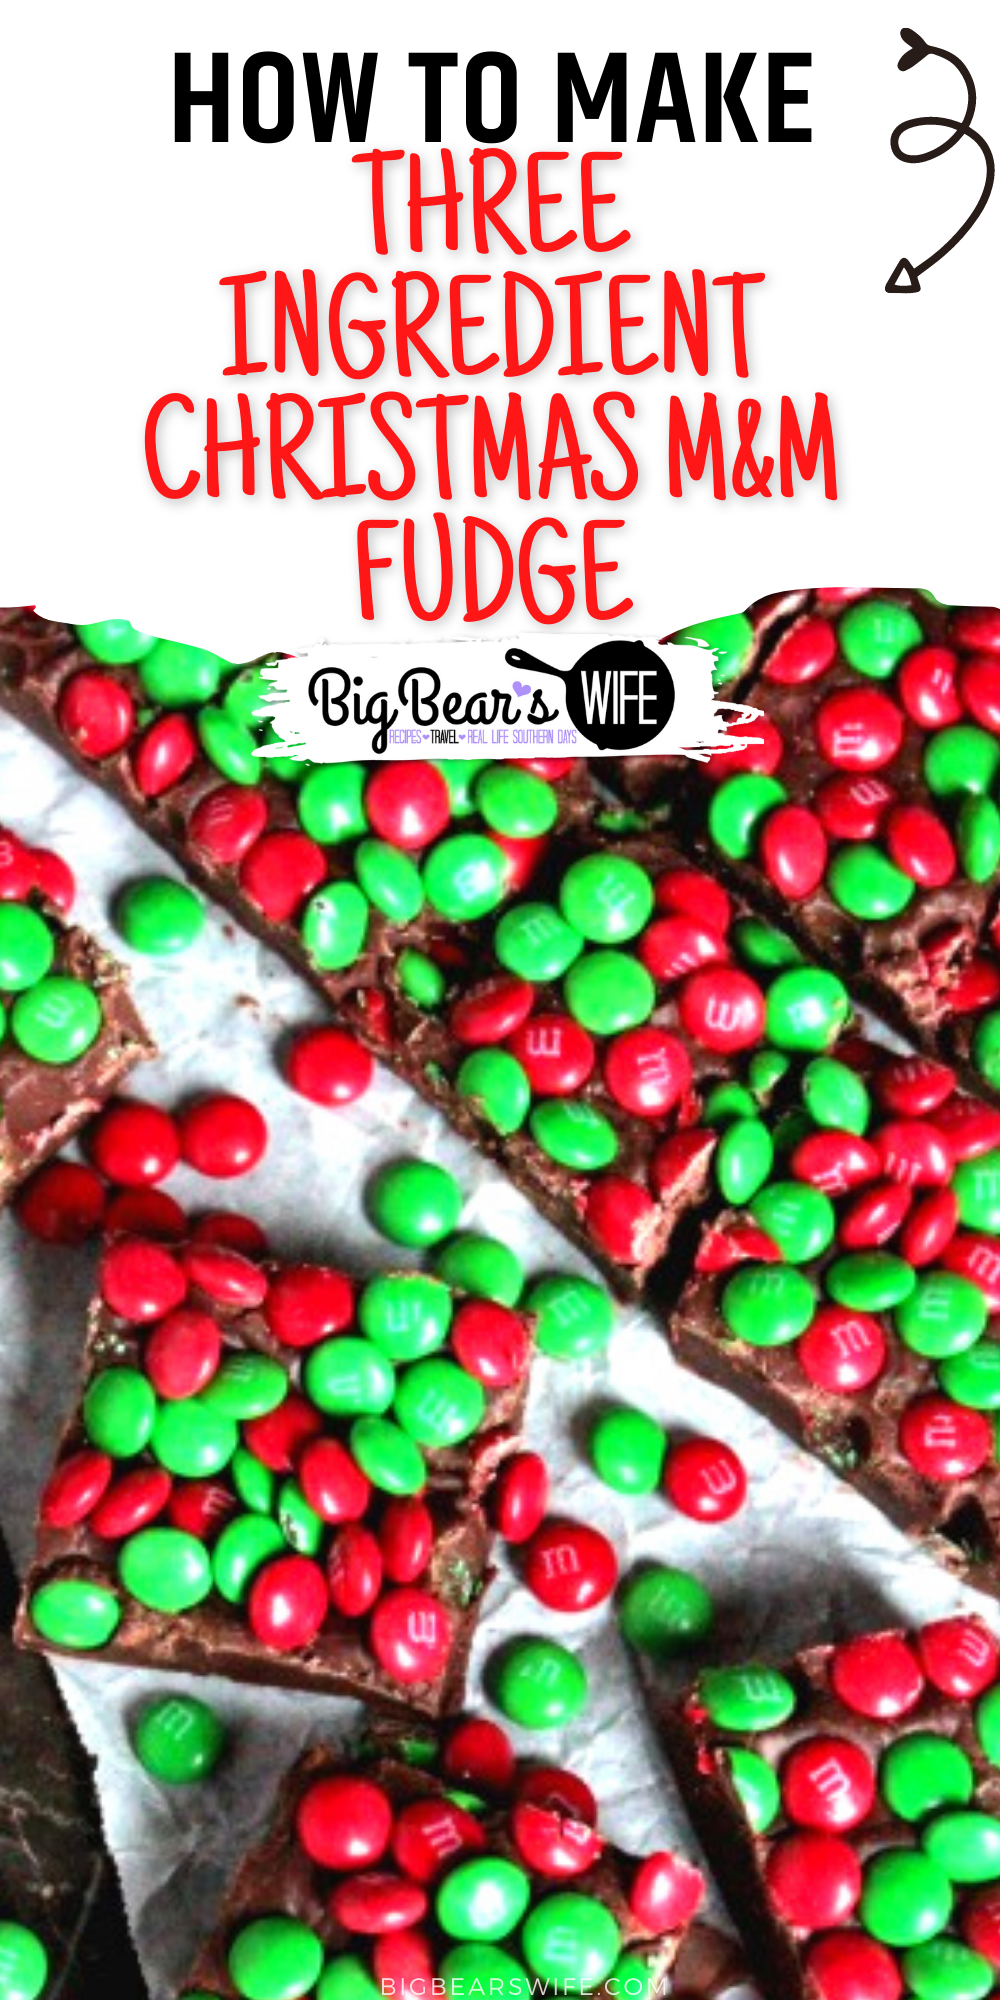 Pack up a few trays of this Three Ingredient Christmas M&M Fudge into cute little Christmas tins and hand them out to friends and family this holiday season! This fudge is so simple to make that you'll want to make it for every holiday! via @bigbearswife